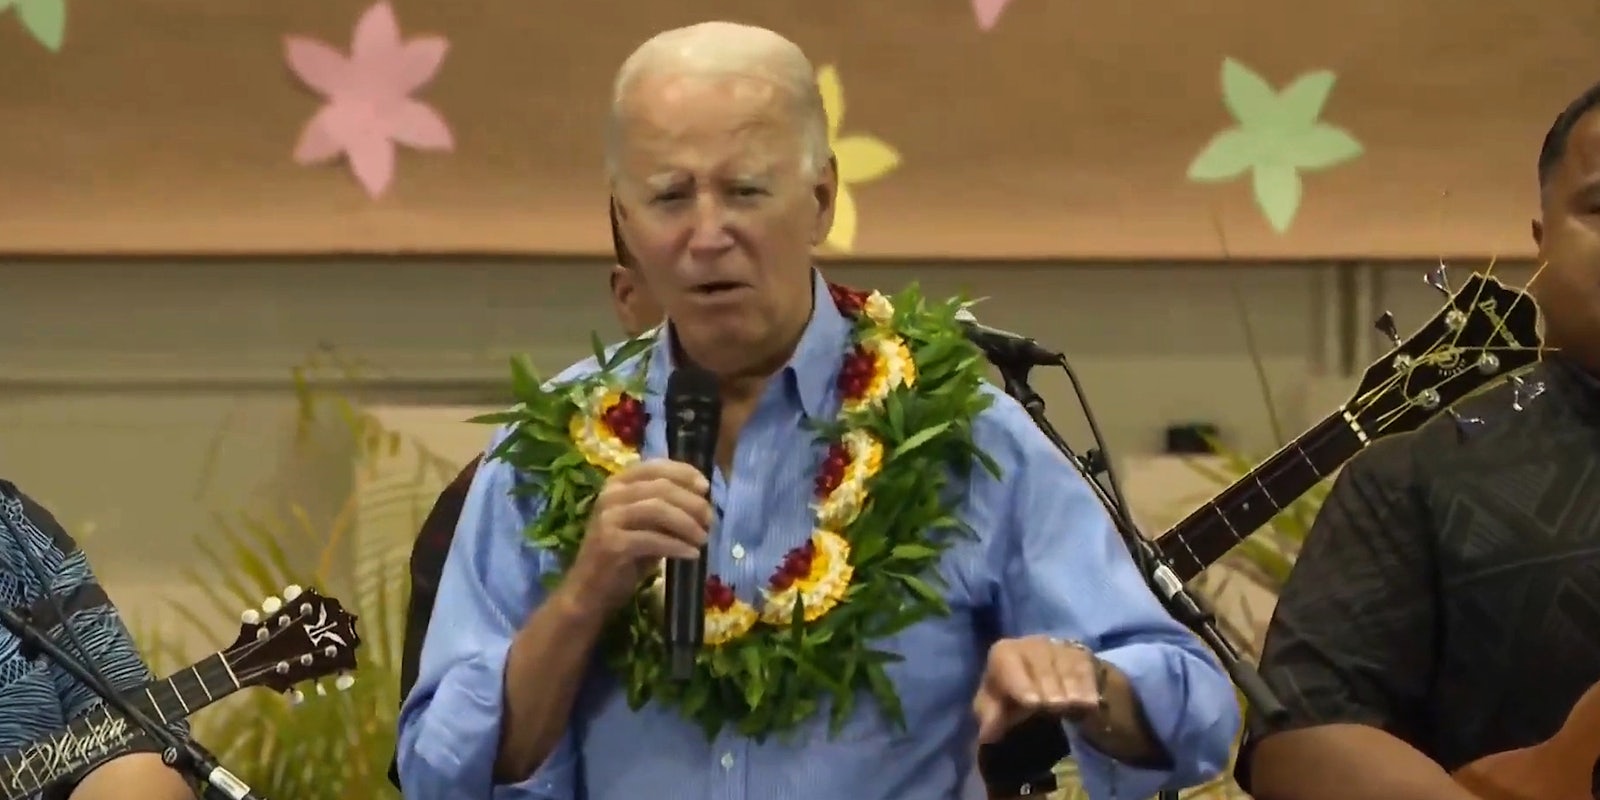 Joe Biden speaking into microphone in front of brown background with flower cutouts